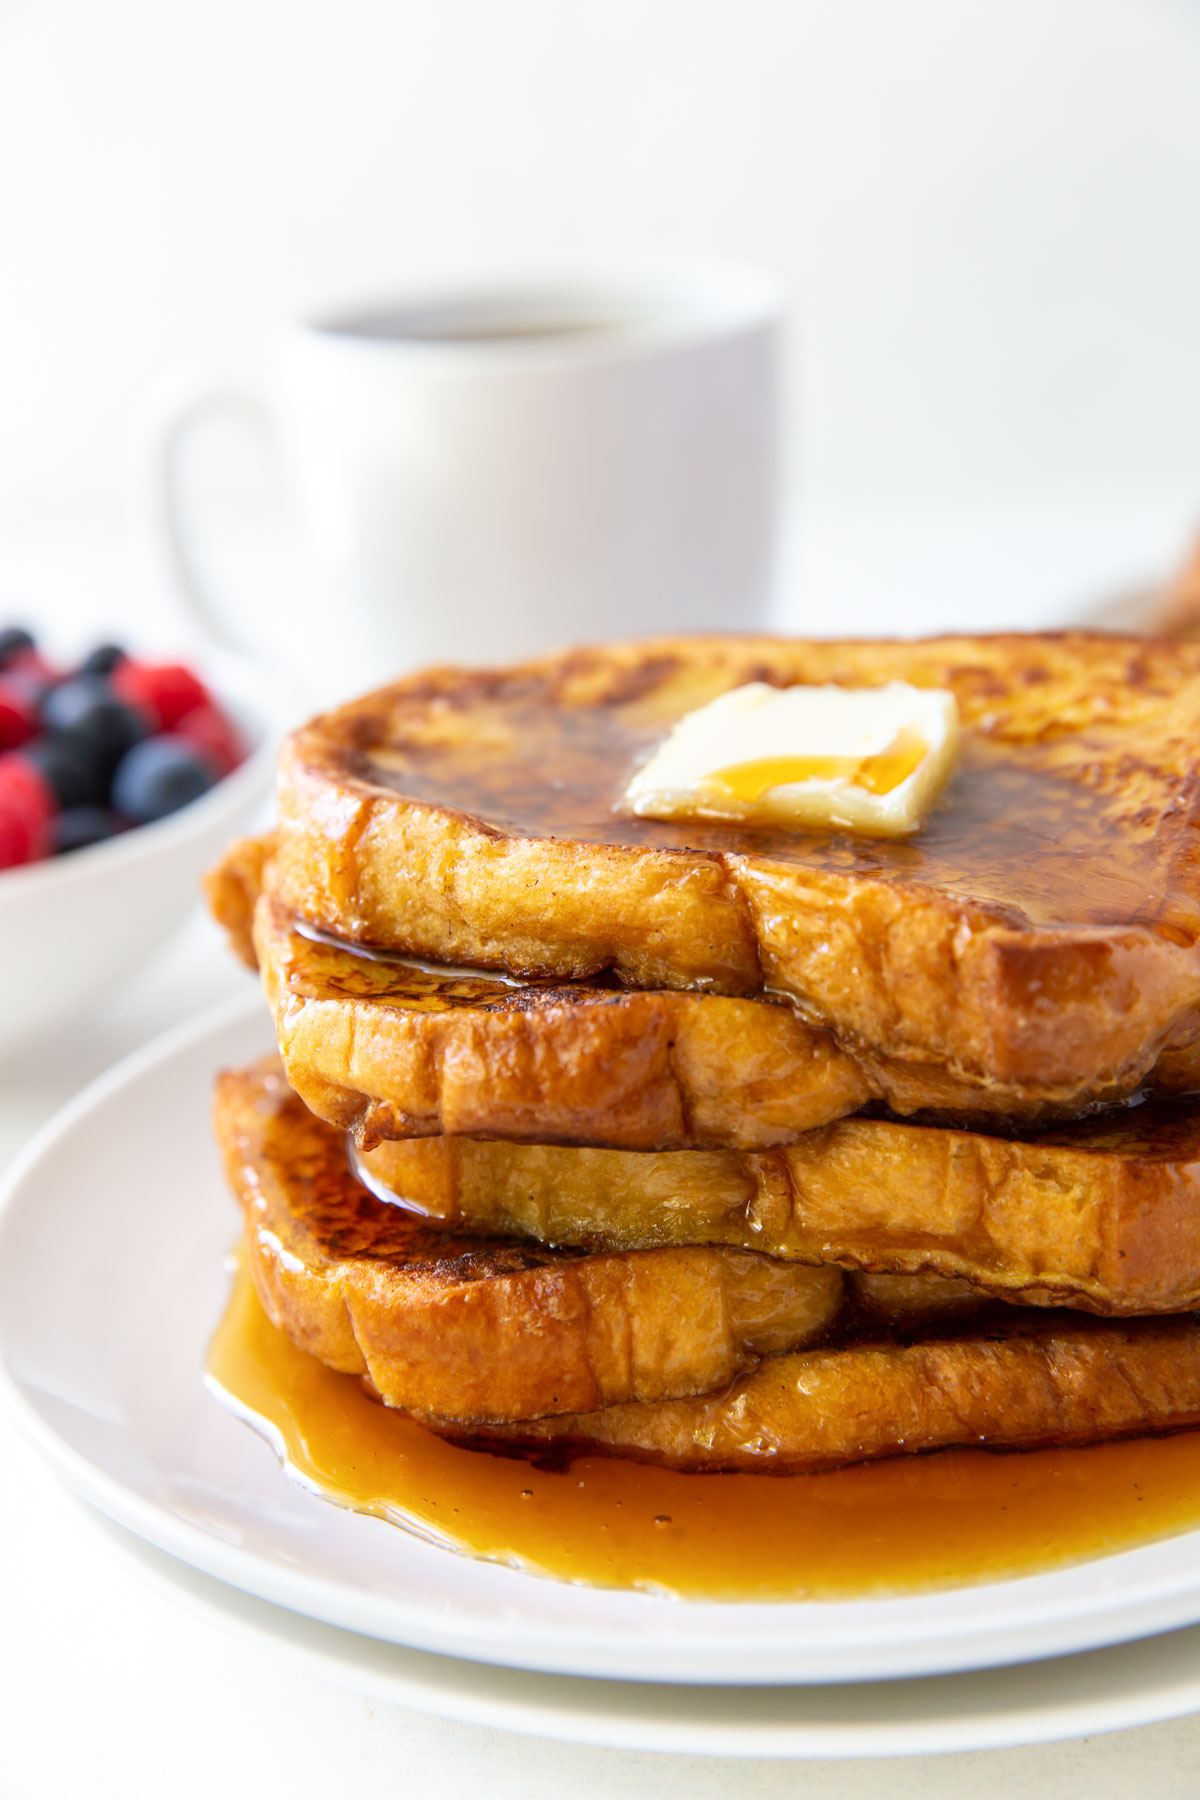 Easy French Toast Recipe - The BEST for Brunch! - Kristine’s Kitchen